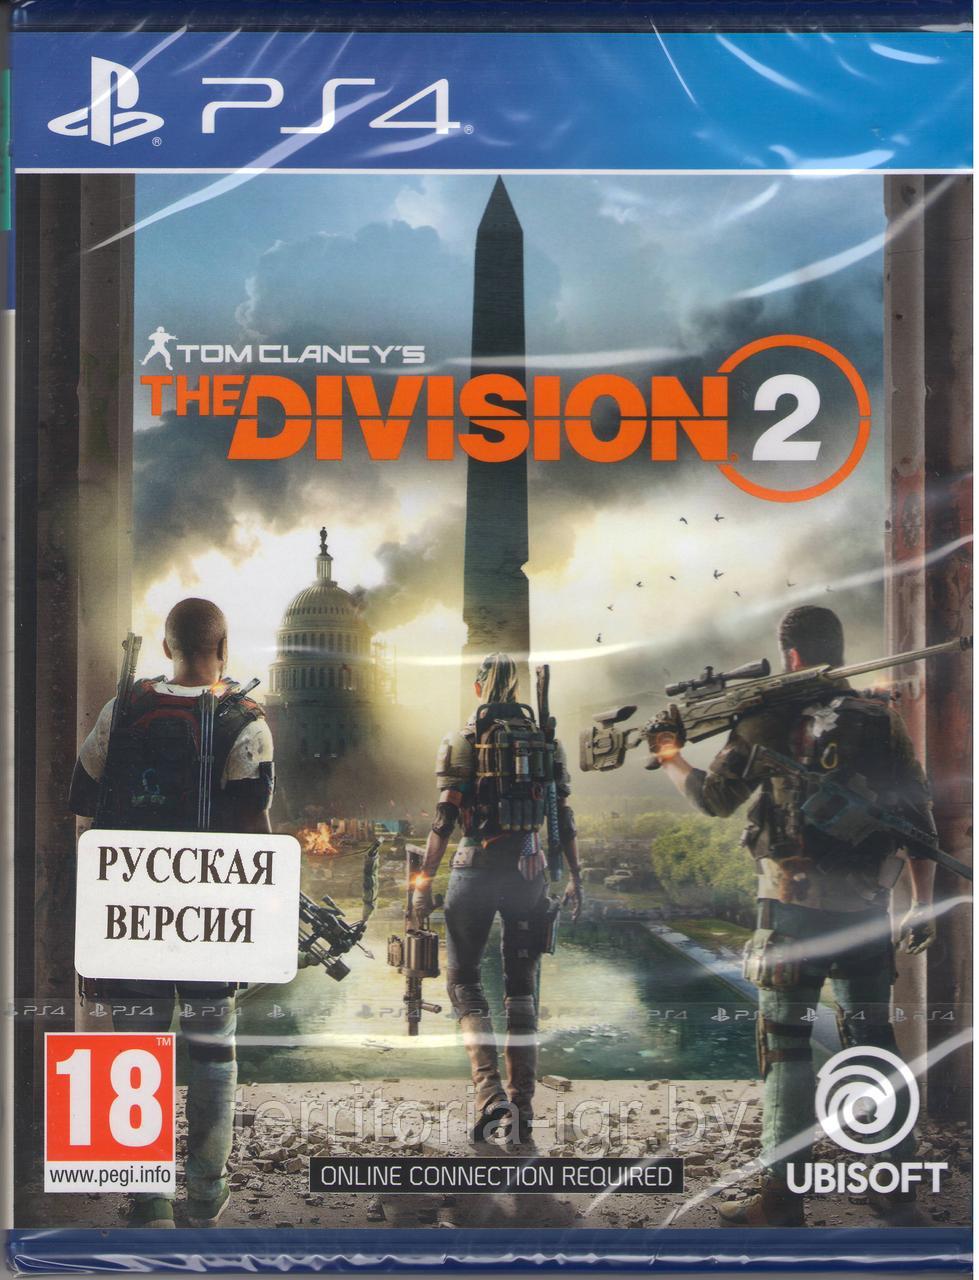 Tom Clancy’s The Division 2 [PS4] (EU pack, RU version) Озвучка!